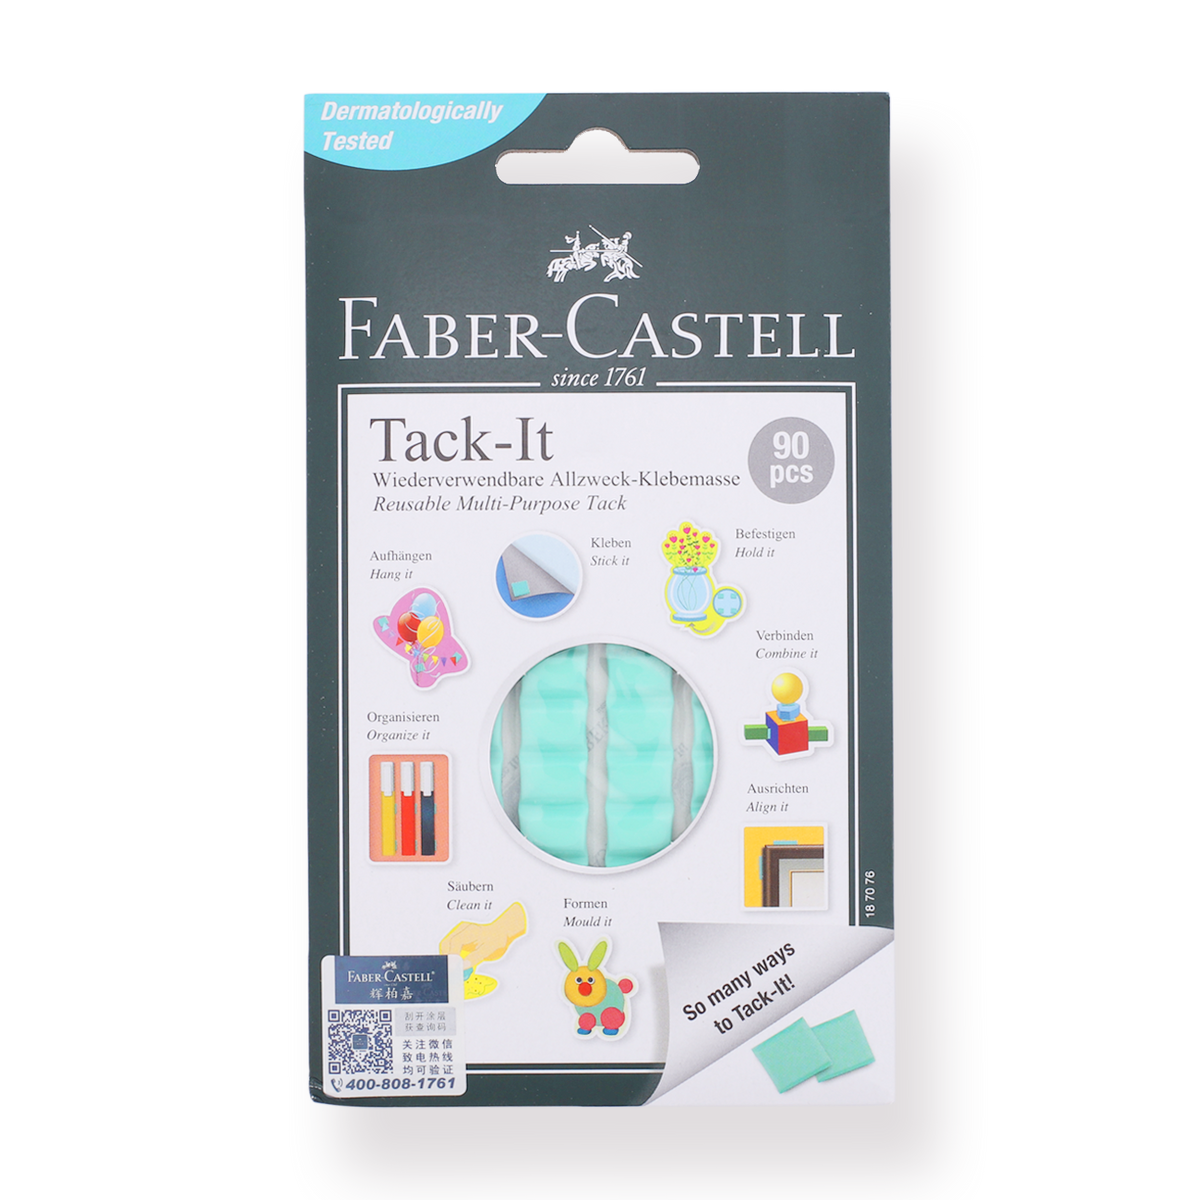 Faber-Castell Markers - Fineliner - 20 pcs. - Multi